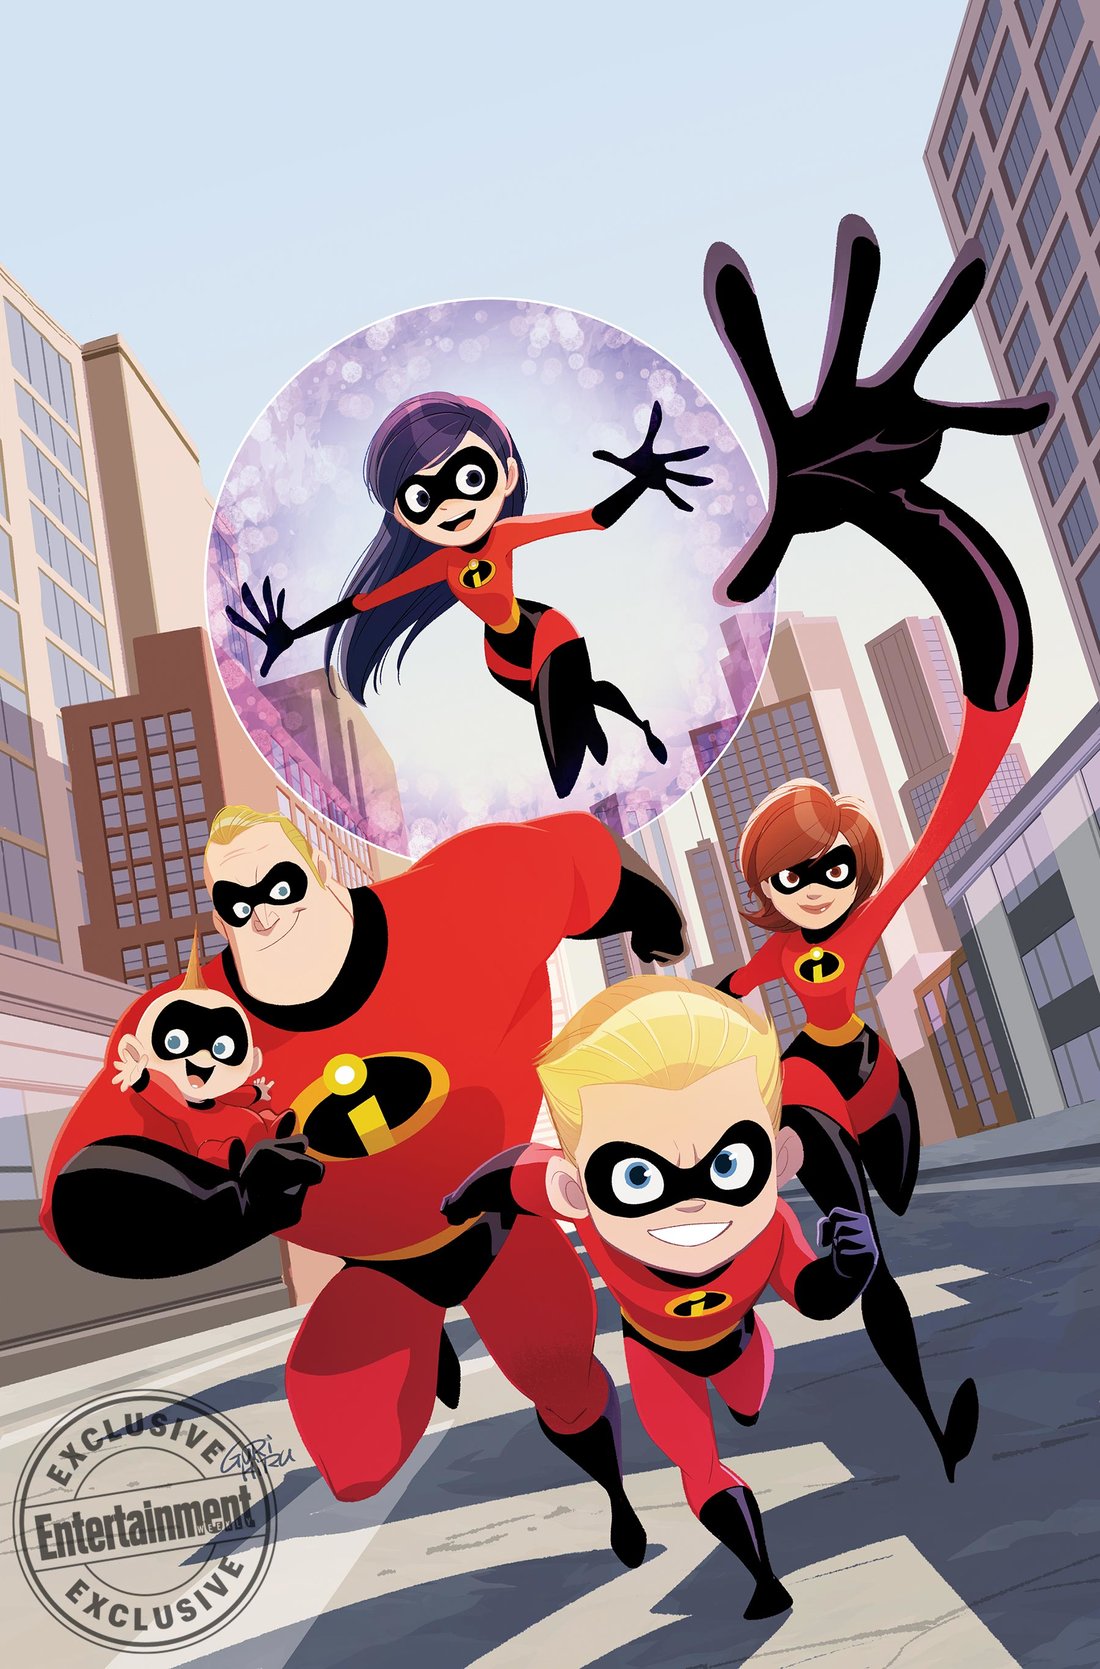 New Incredibles 2 Tie-In Comics Will Explore The Parr Family’s Domestic Lives